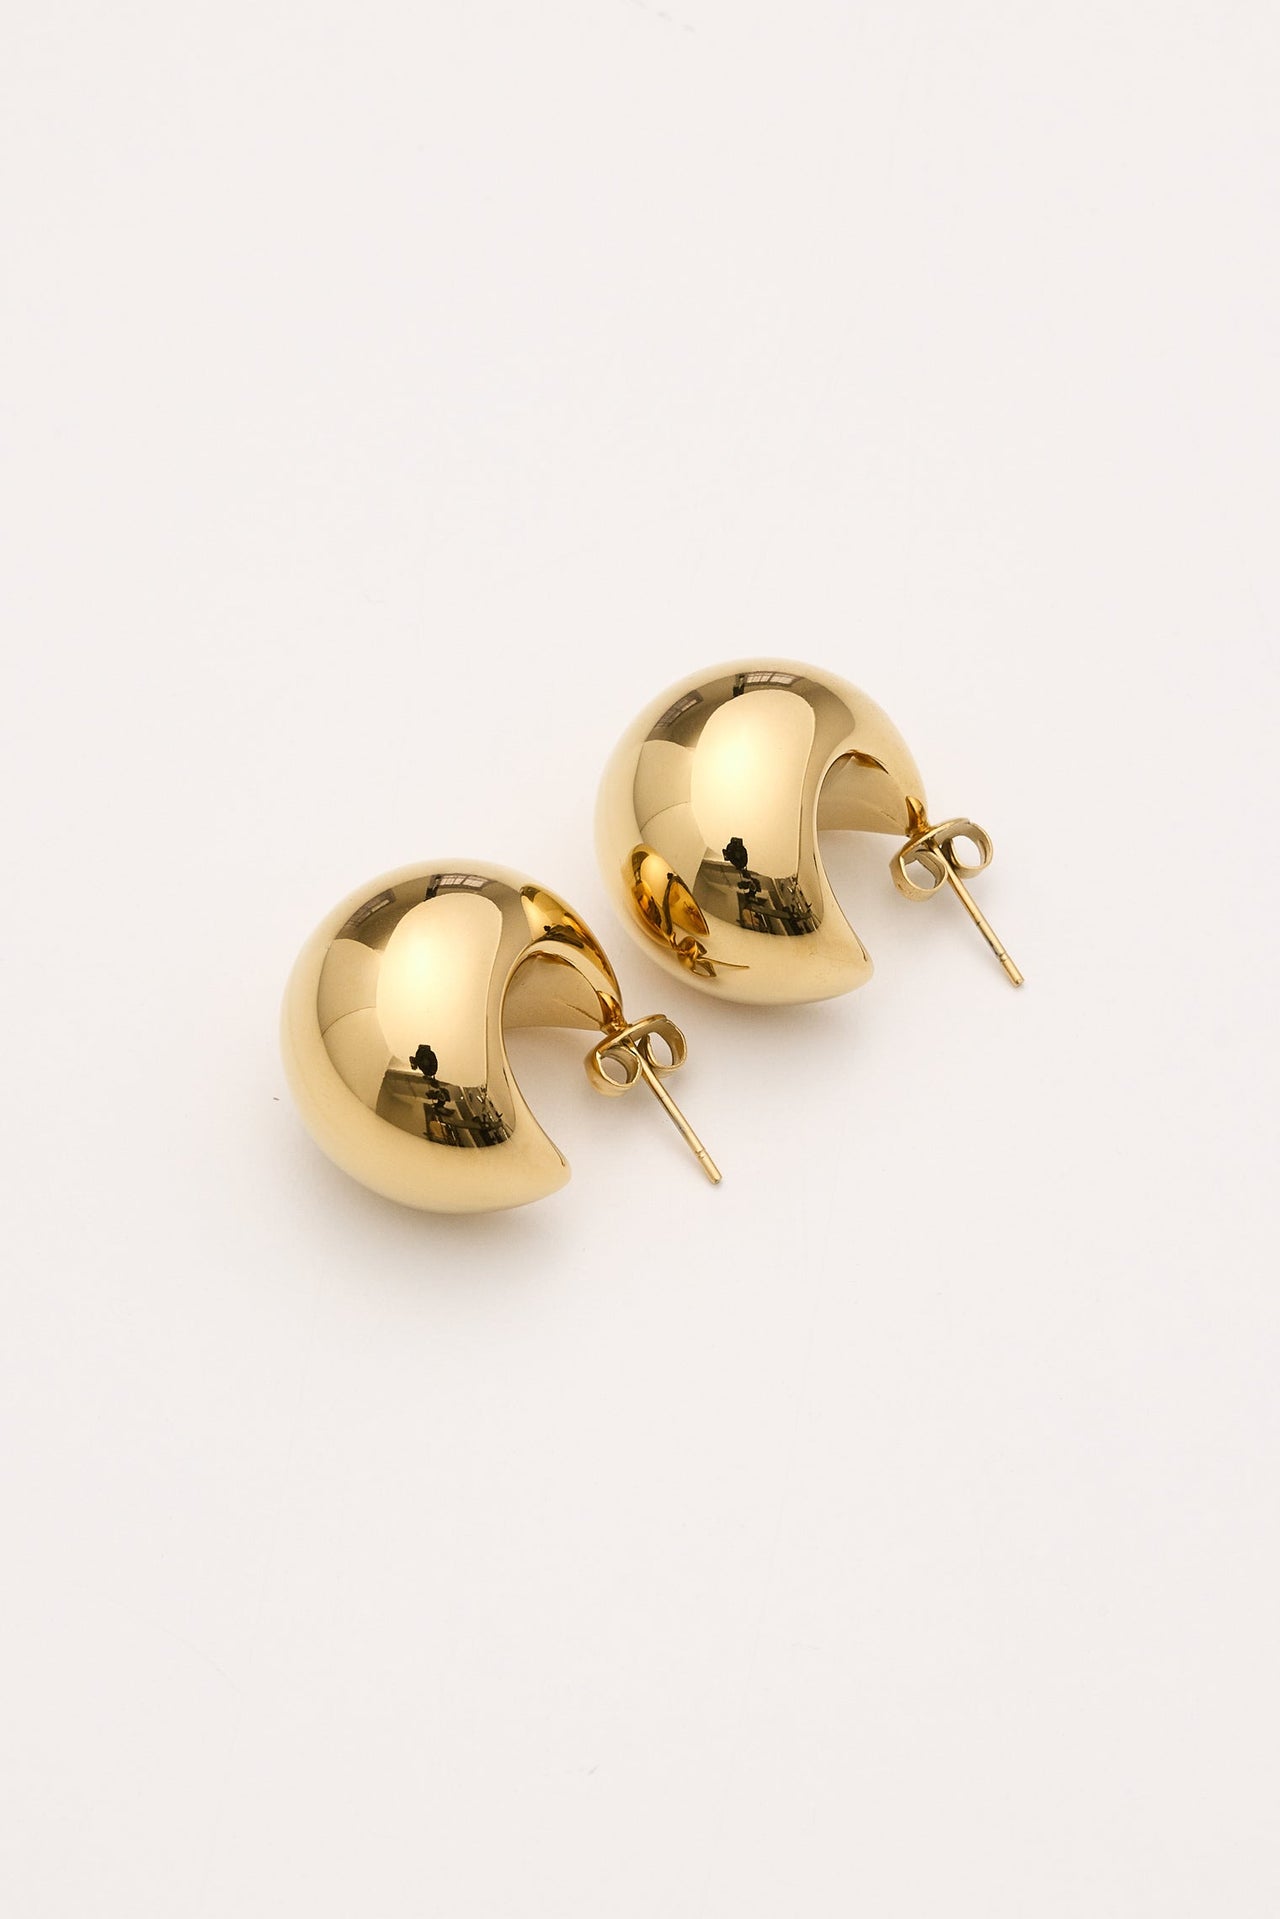 a pair of gold earrings on a white background